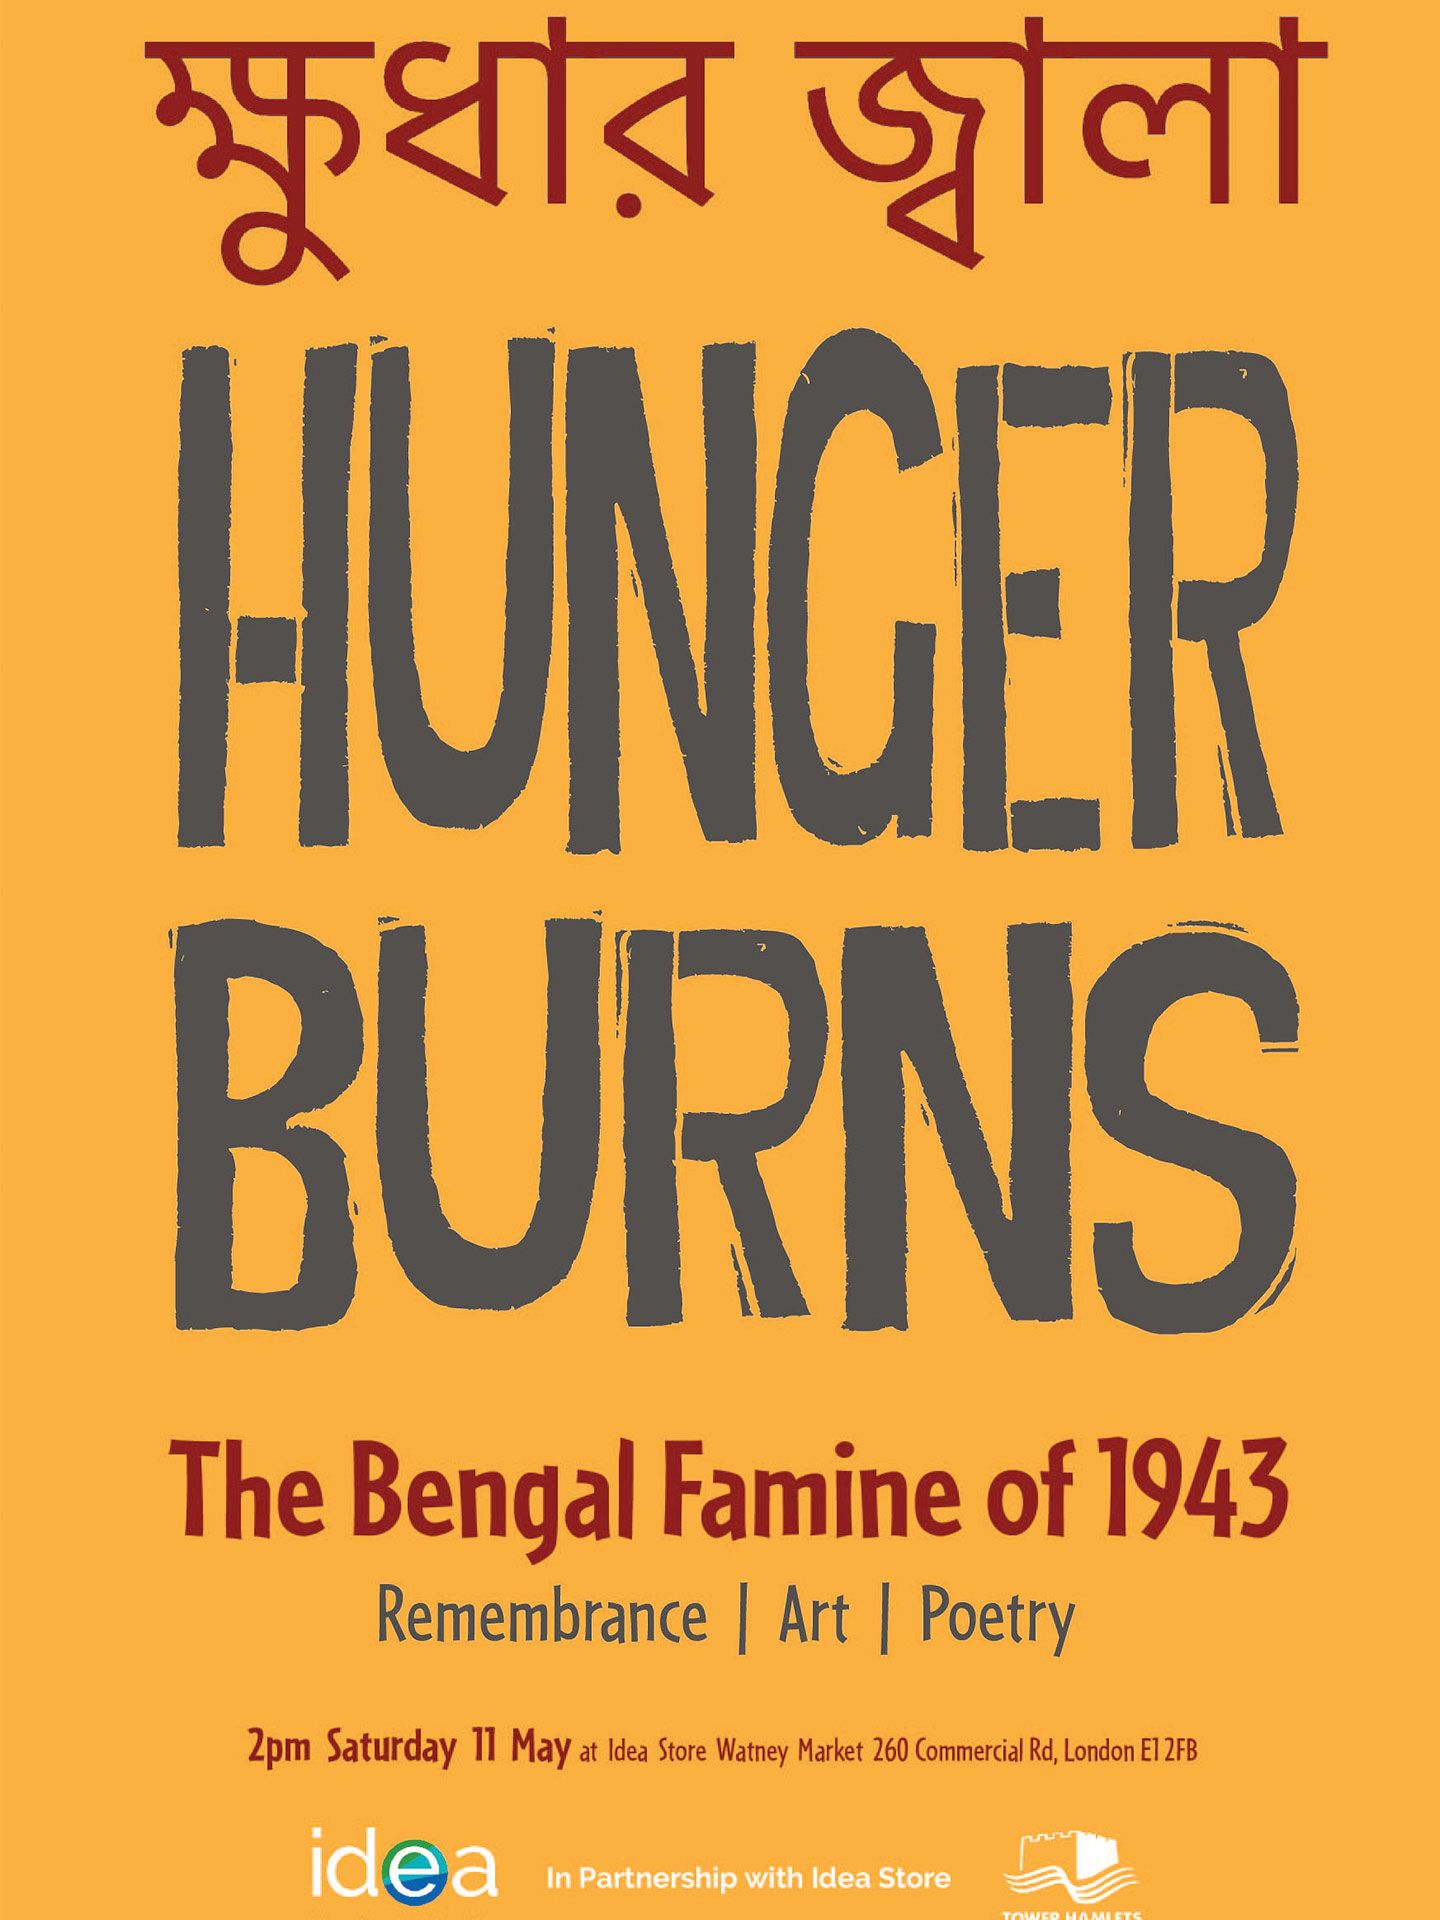 Poster for the Hunger Burns exhibition, which has a yellow background and the words Hunger Burns in capitals, the address, and the Tower Hamlets logo.